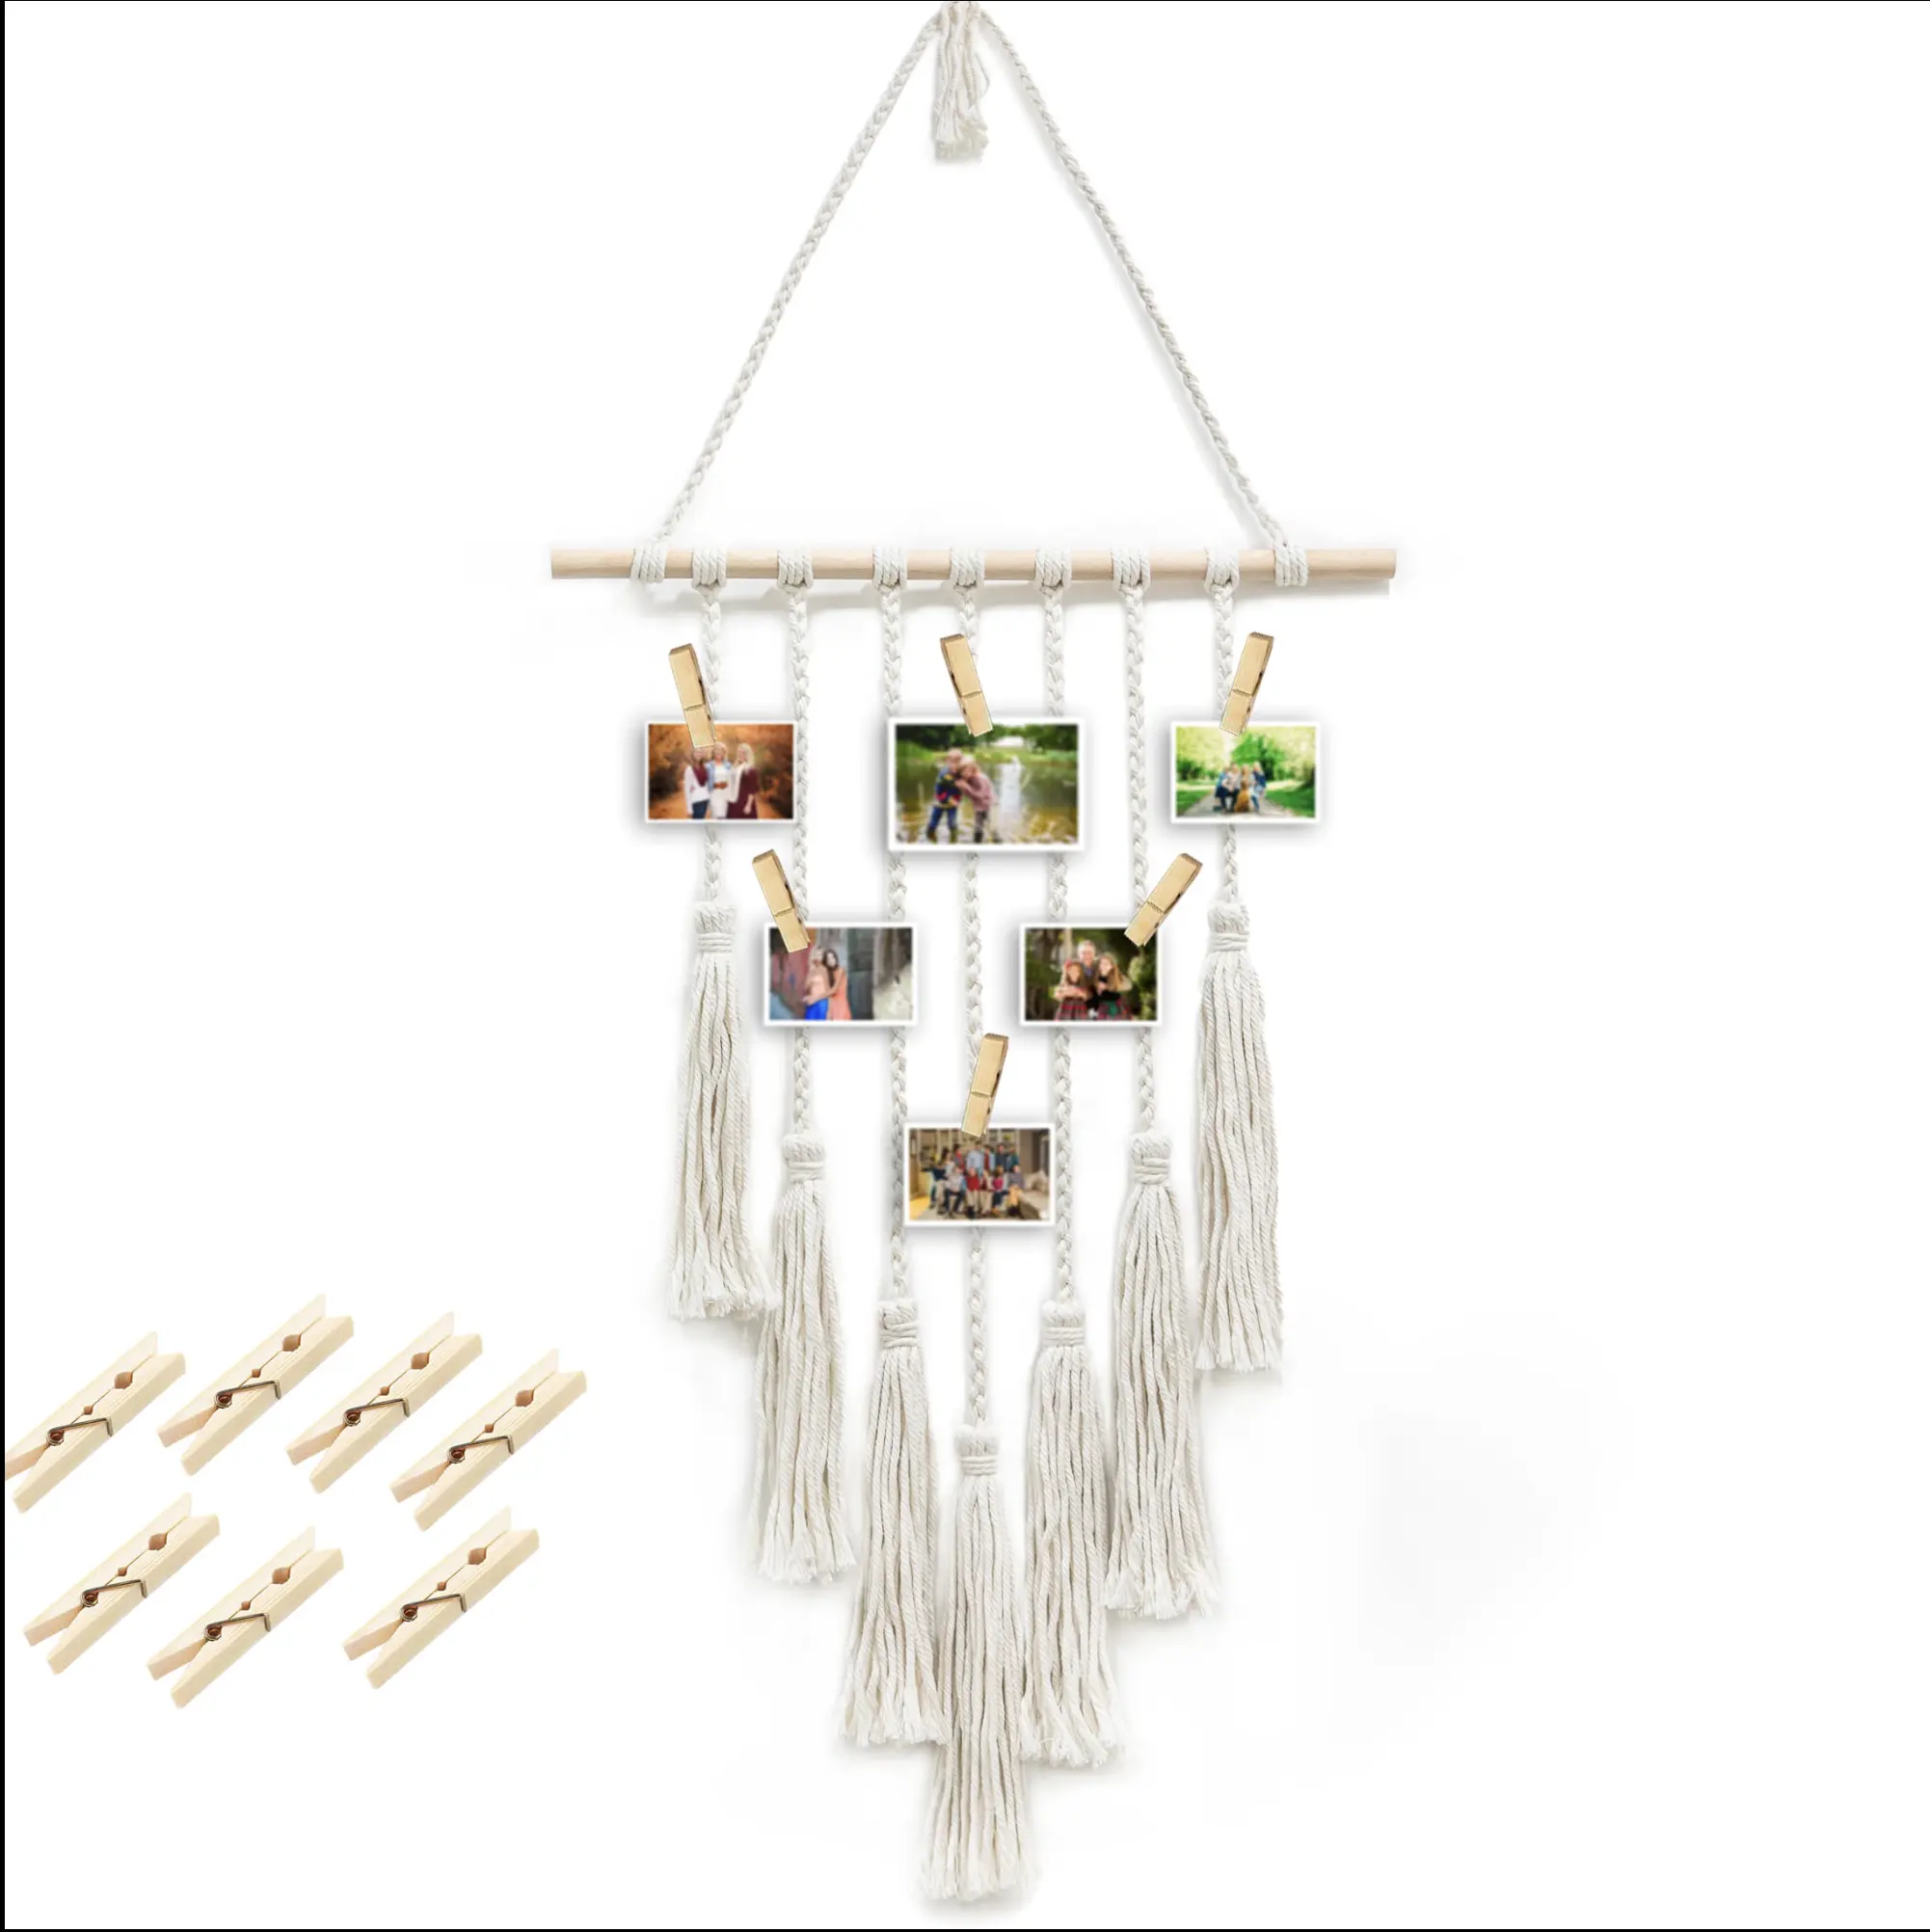 Macrame Hanging Photo Display with Wood Bead, Macrame Wall Hanging Picture Organizer Boho Home Decor for Home Bedroom Decor